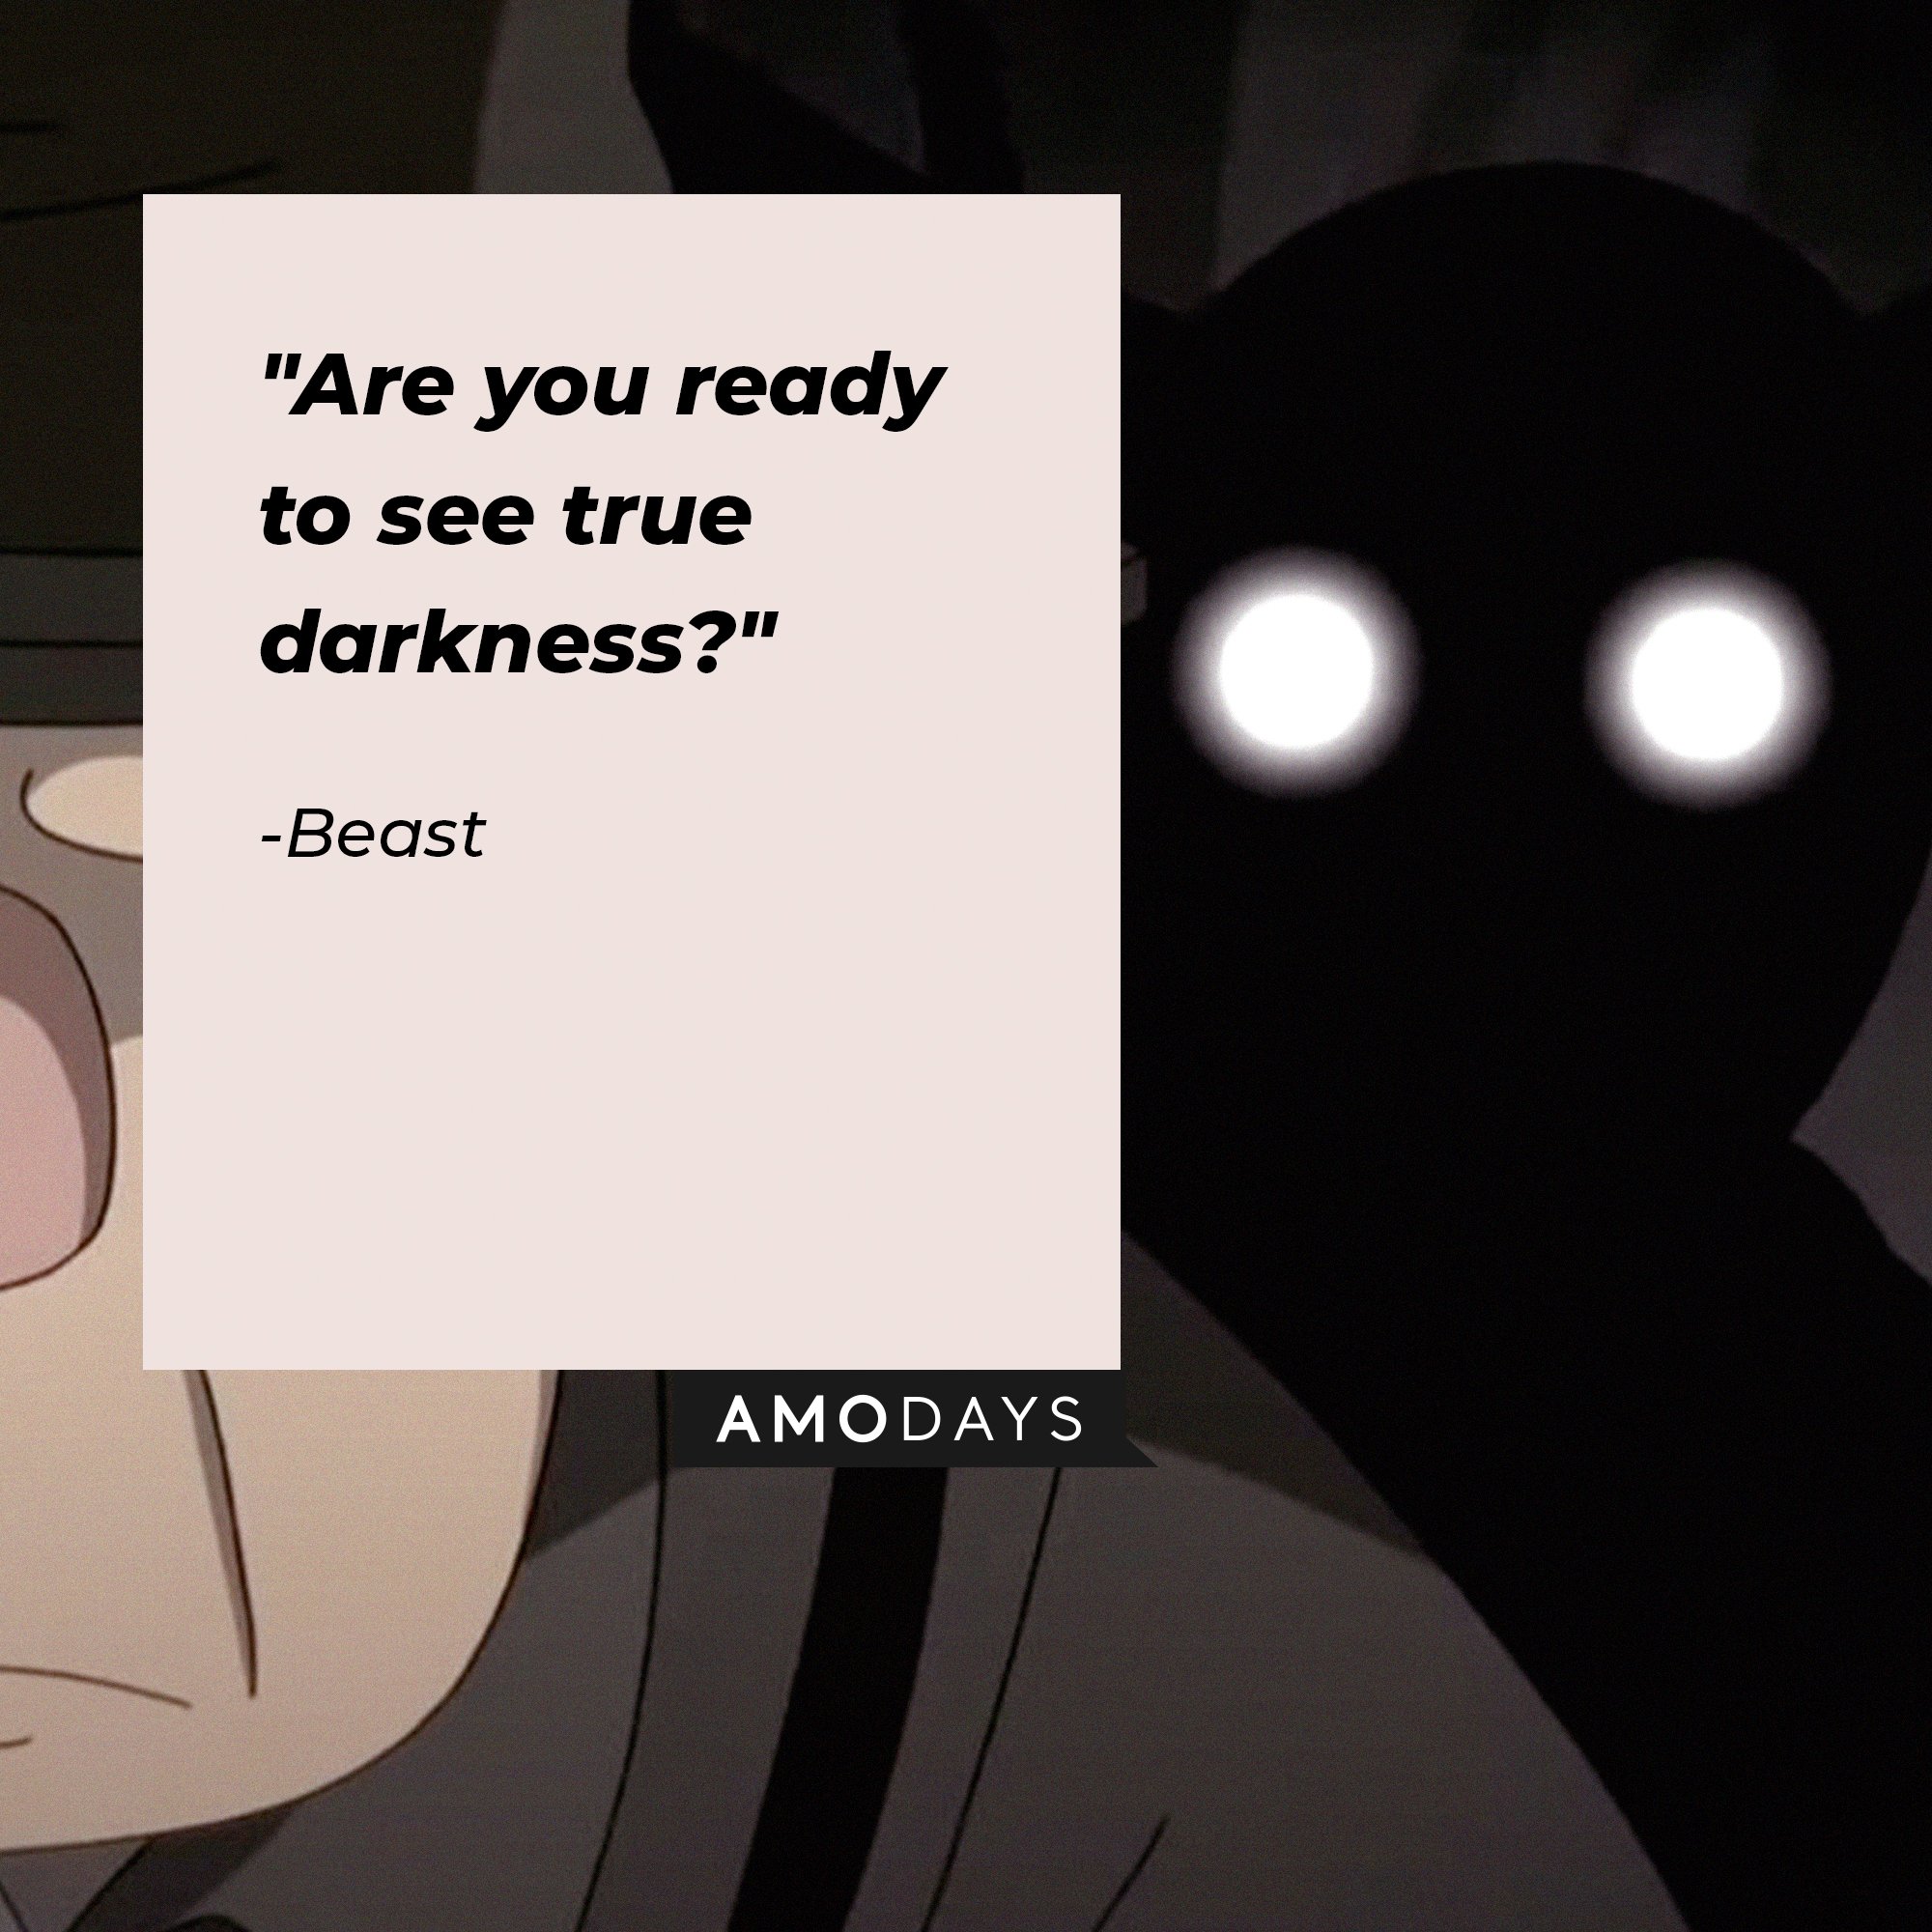  Beast’s quote: "Are you ready to see true darkness?" | Image: AmoDays